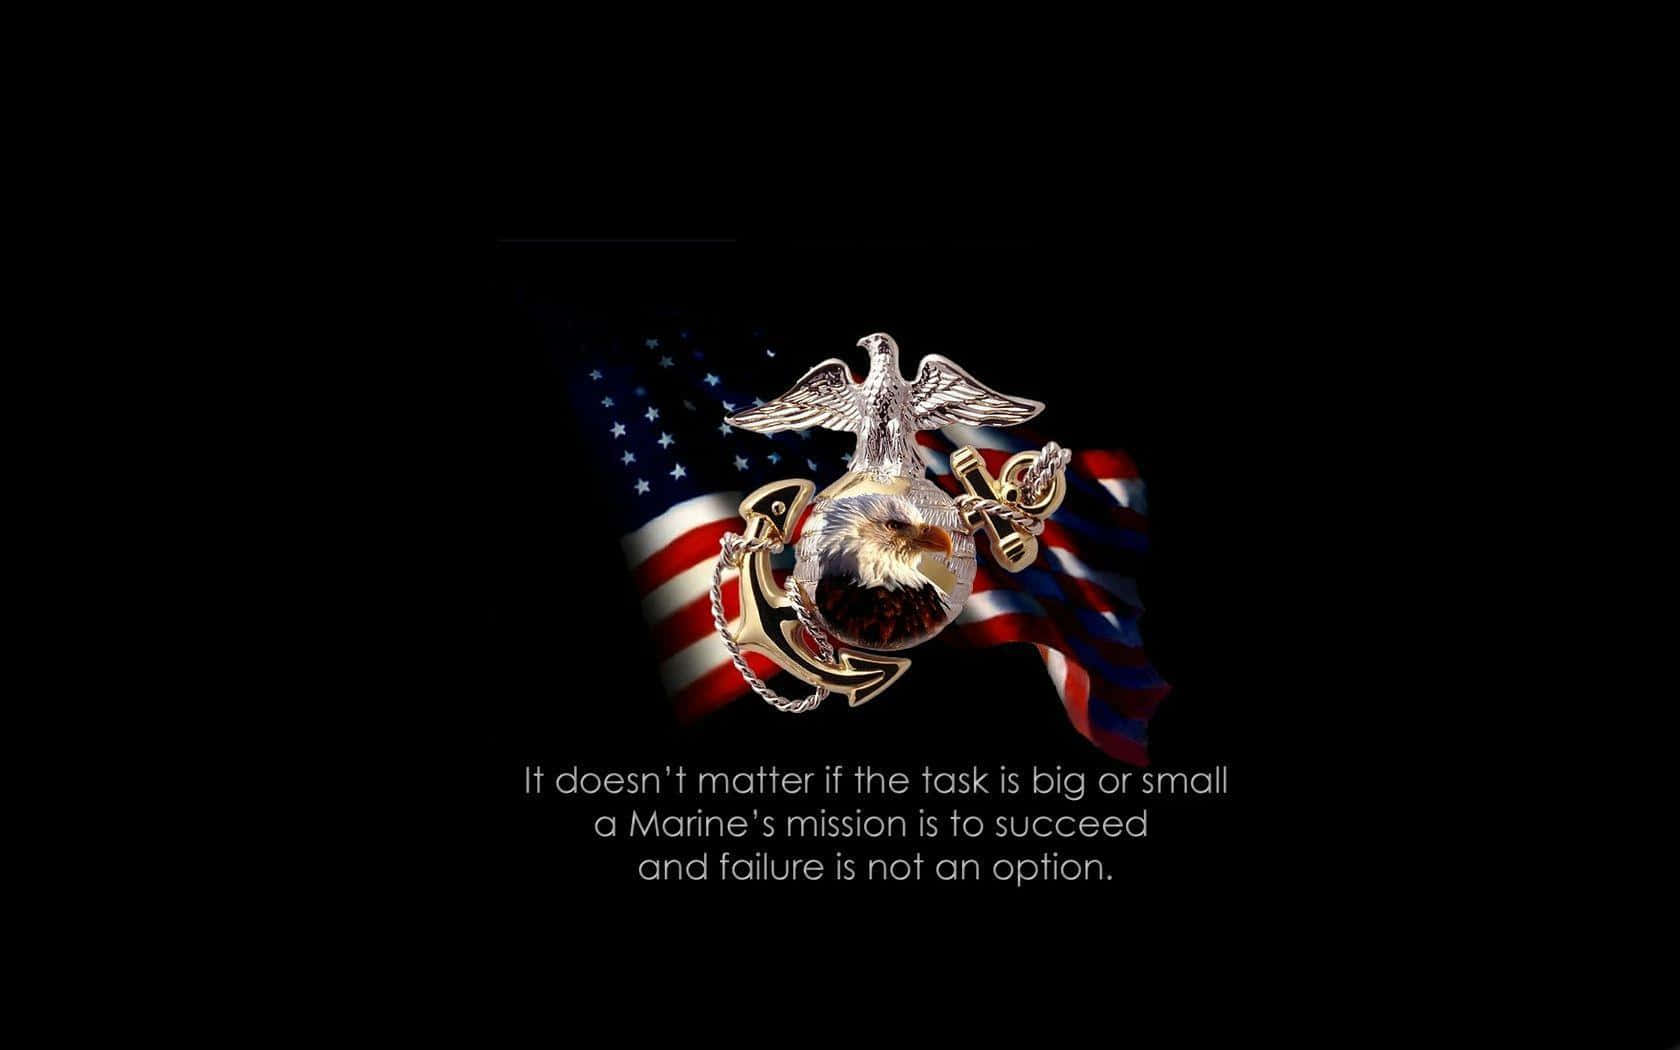 Show your support for the USMC wearing the USMC logo Wallpaper